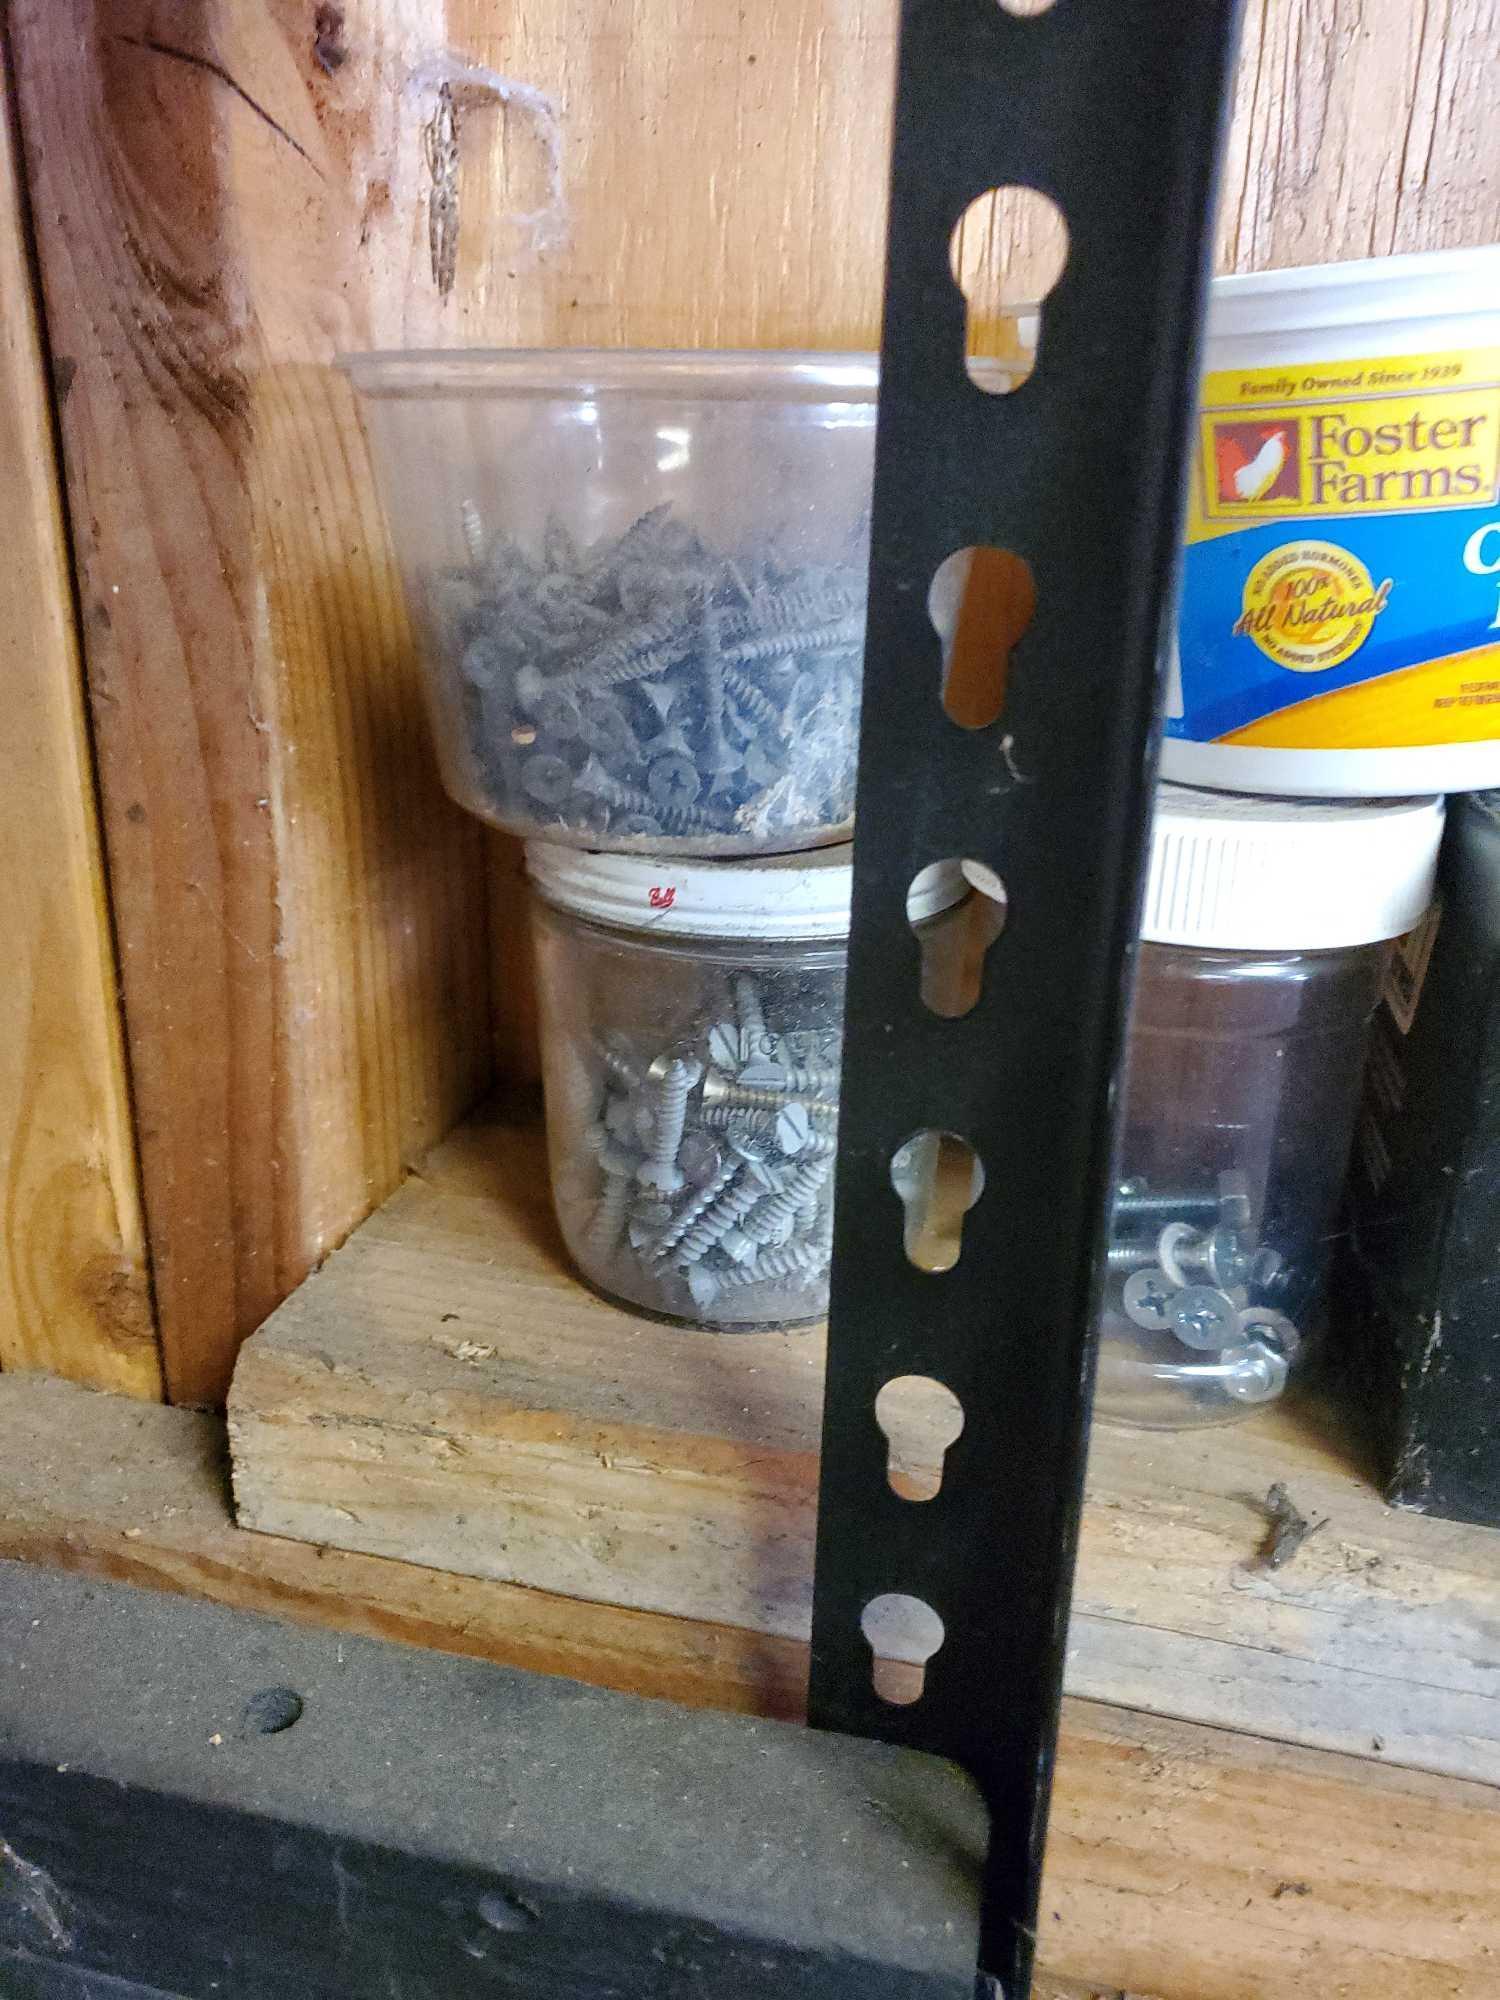 BOXES OF NAILS, SCREWS AND PARTS